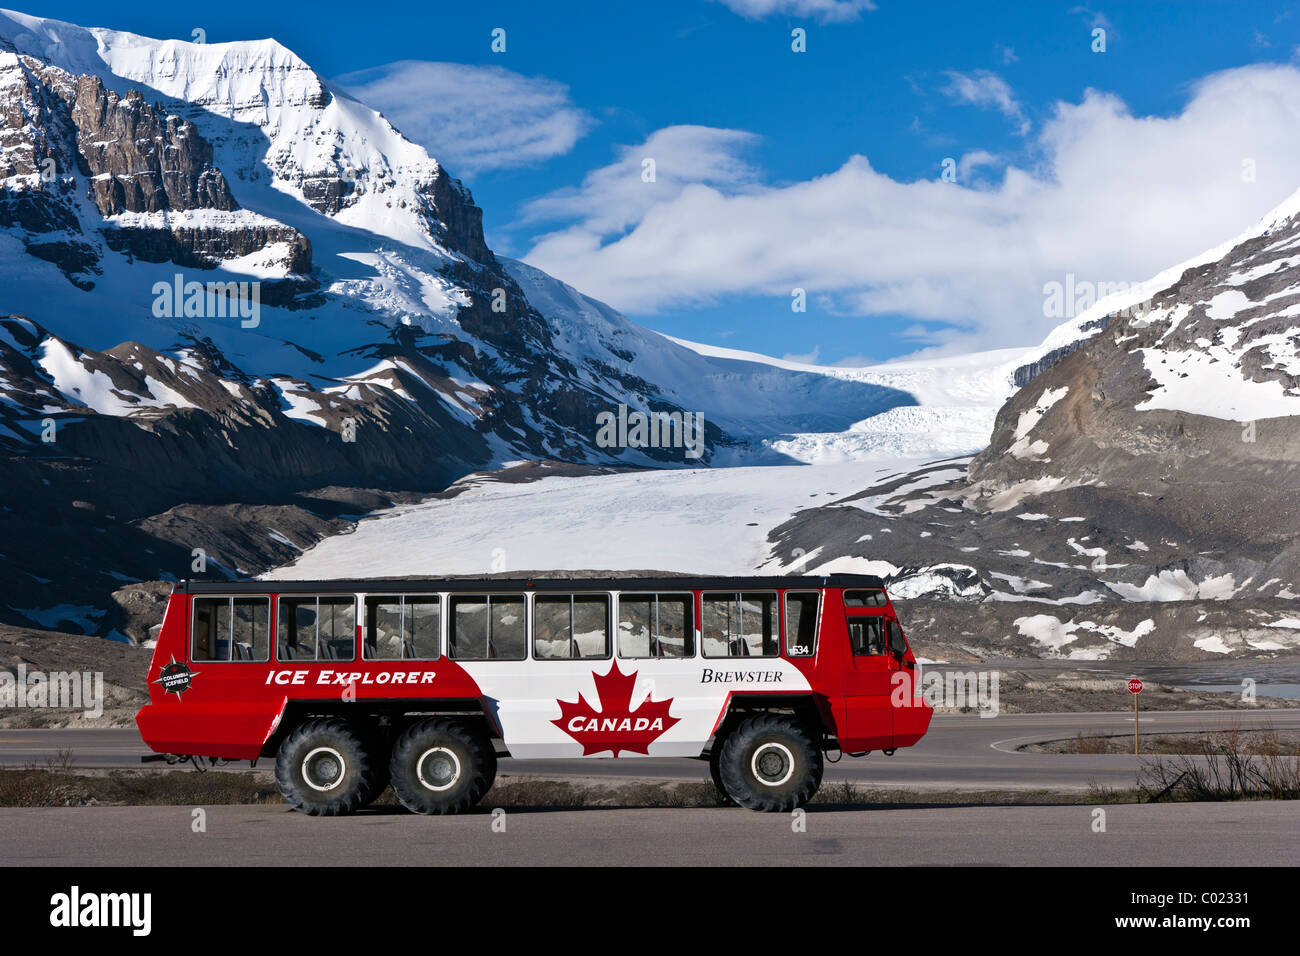 Icefield Explorer vehicle in front of the Athabasca Glacier at the Columbia Icefield Stock Photo